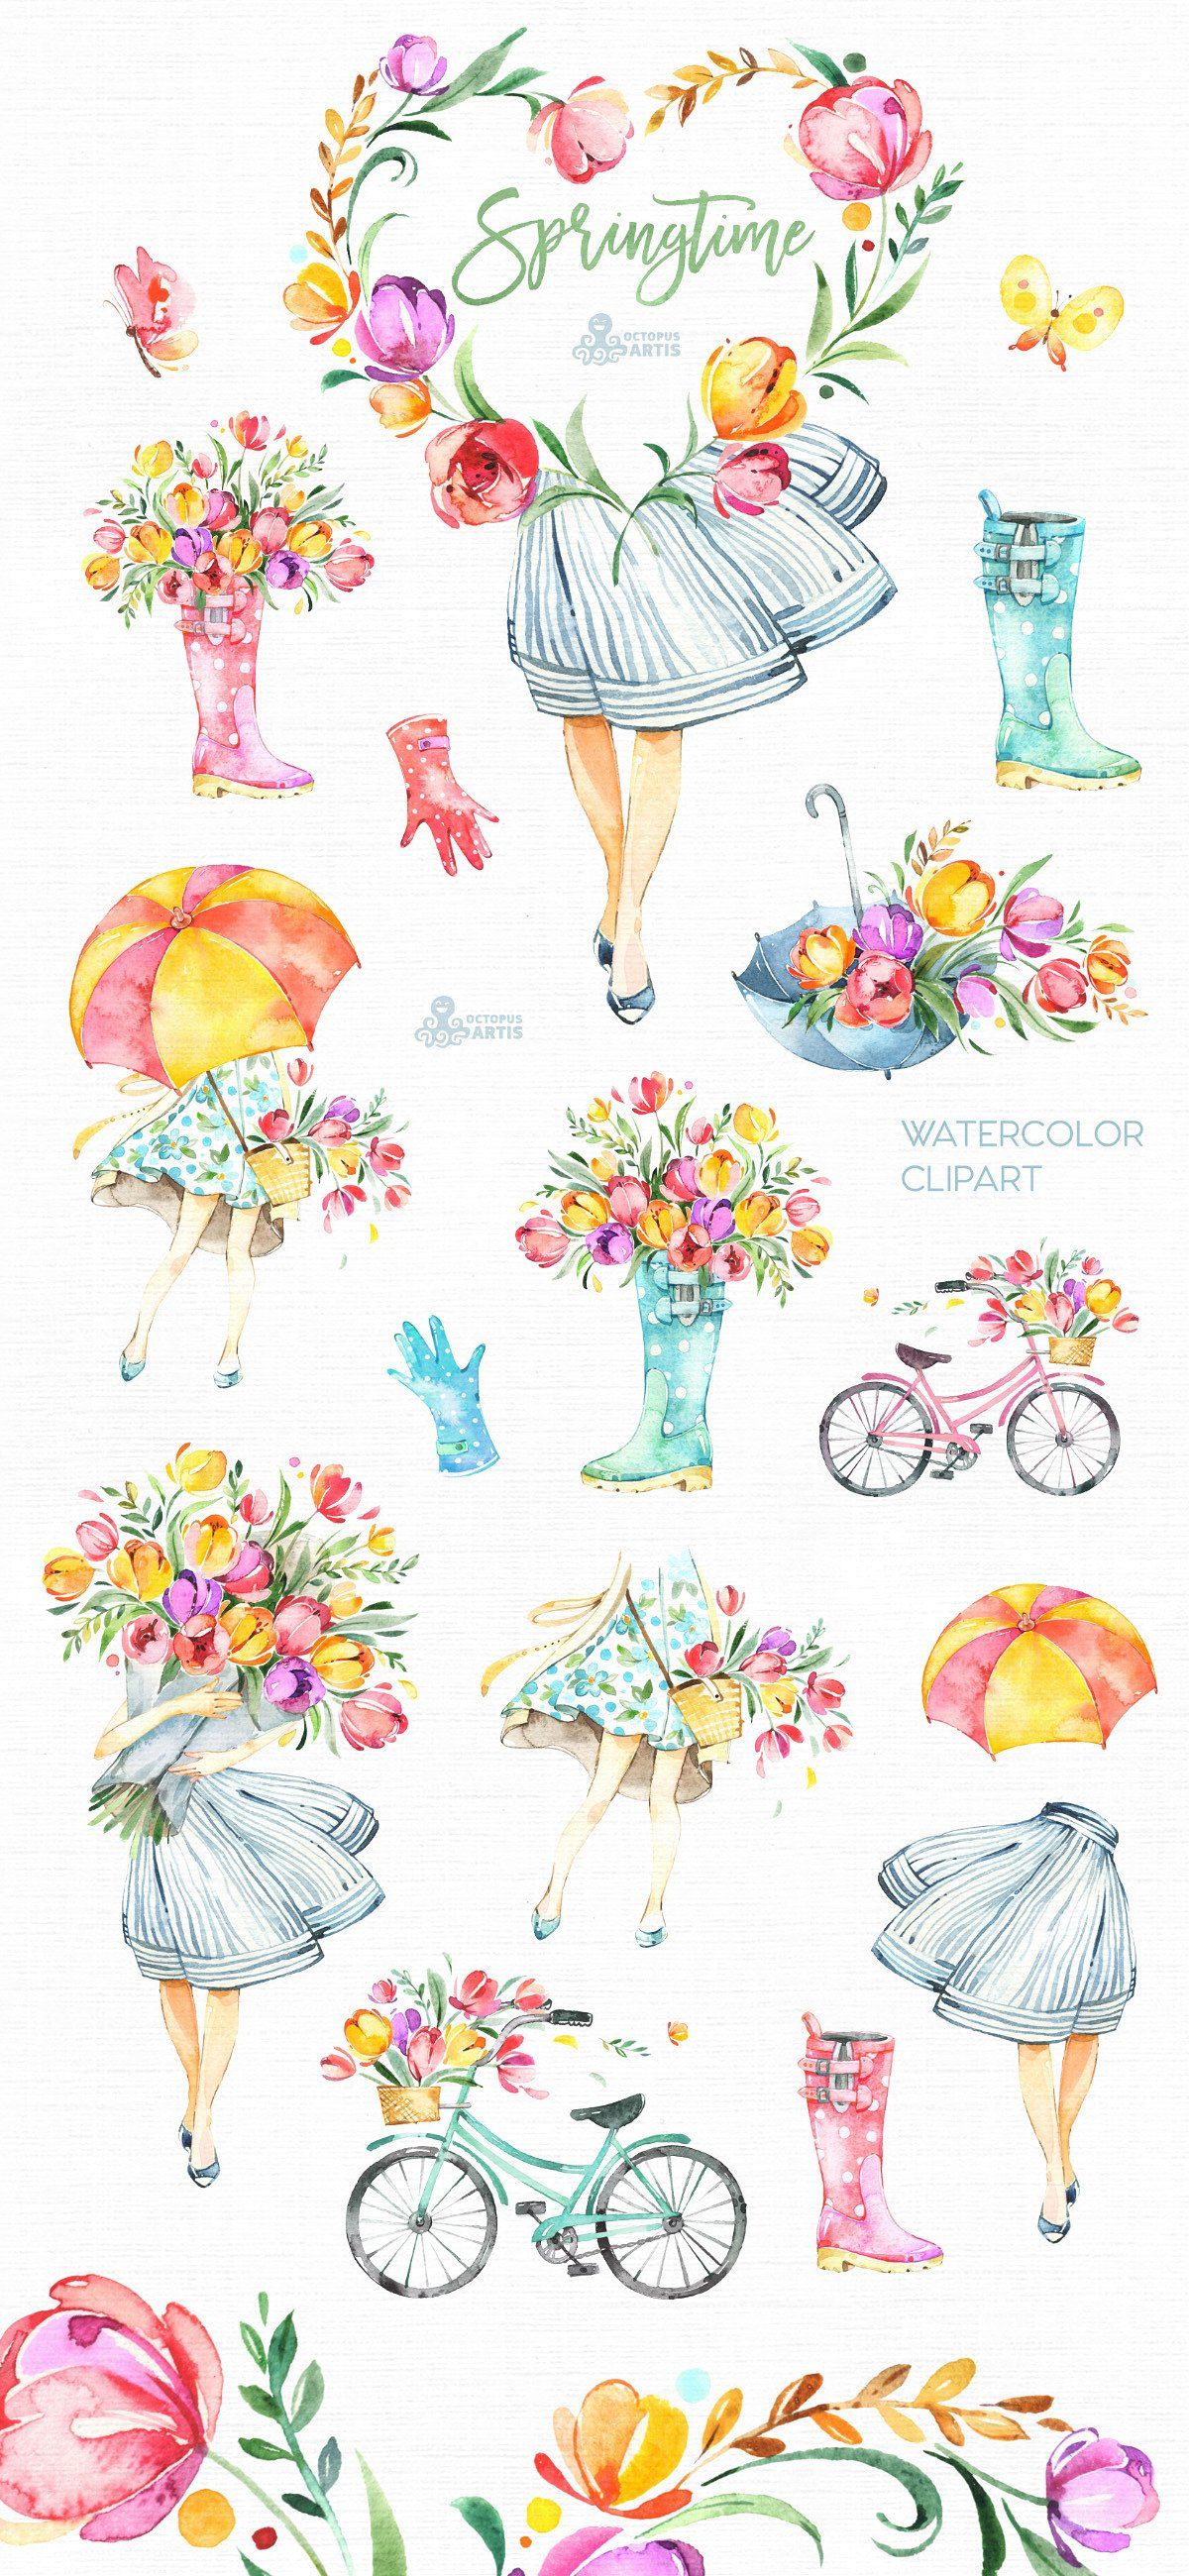 Springtime. Watercolor collection by OctopusArtis on.